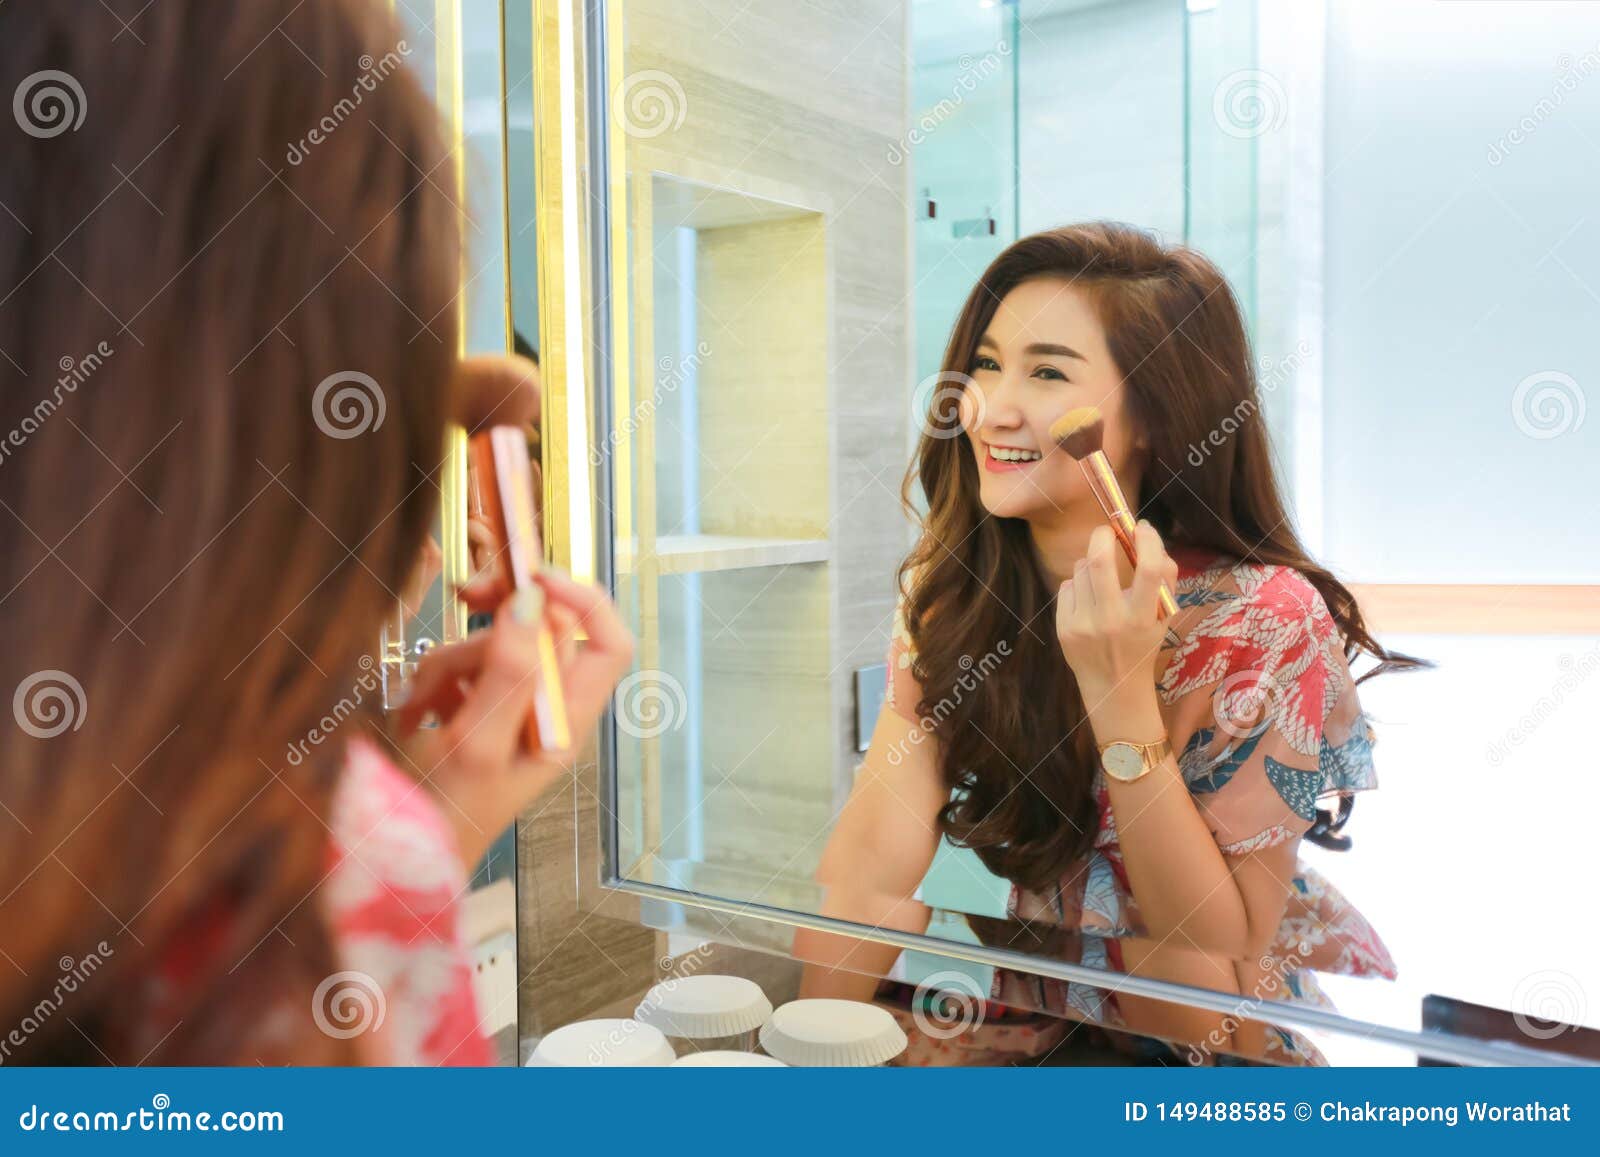 woman getting ready for work makeup routine putting in bathroom mirror at home